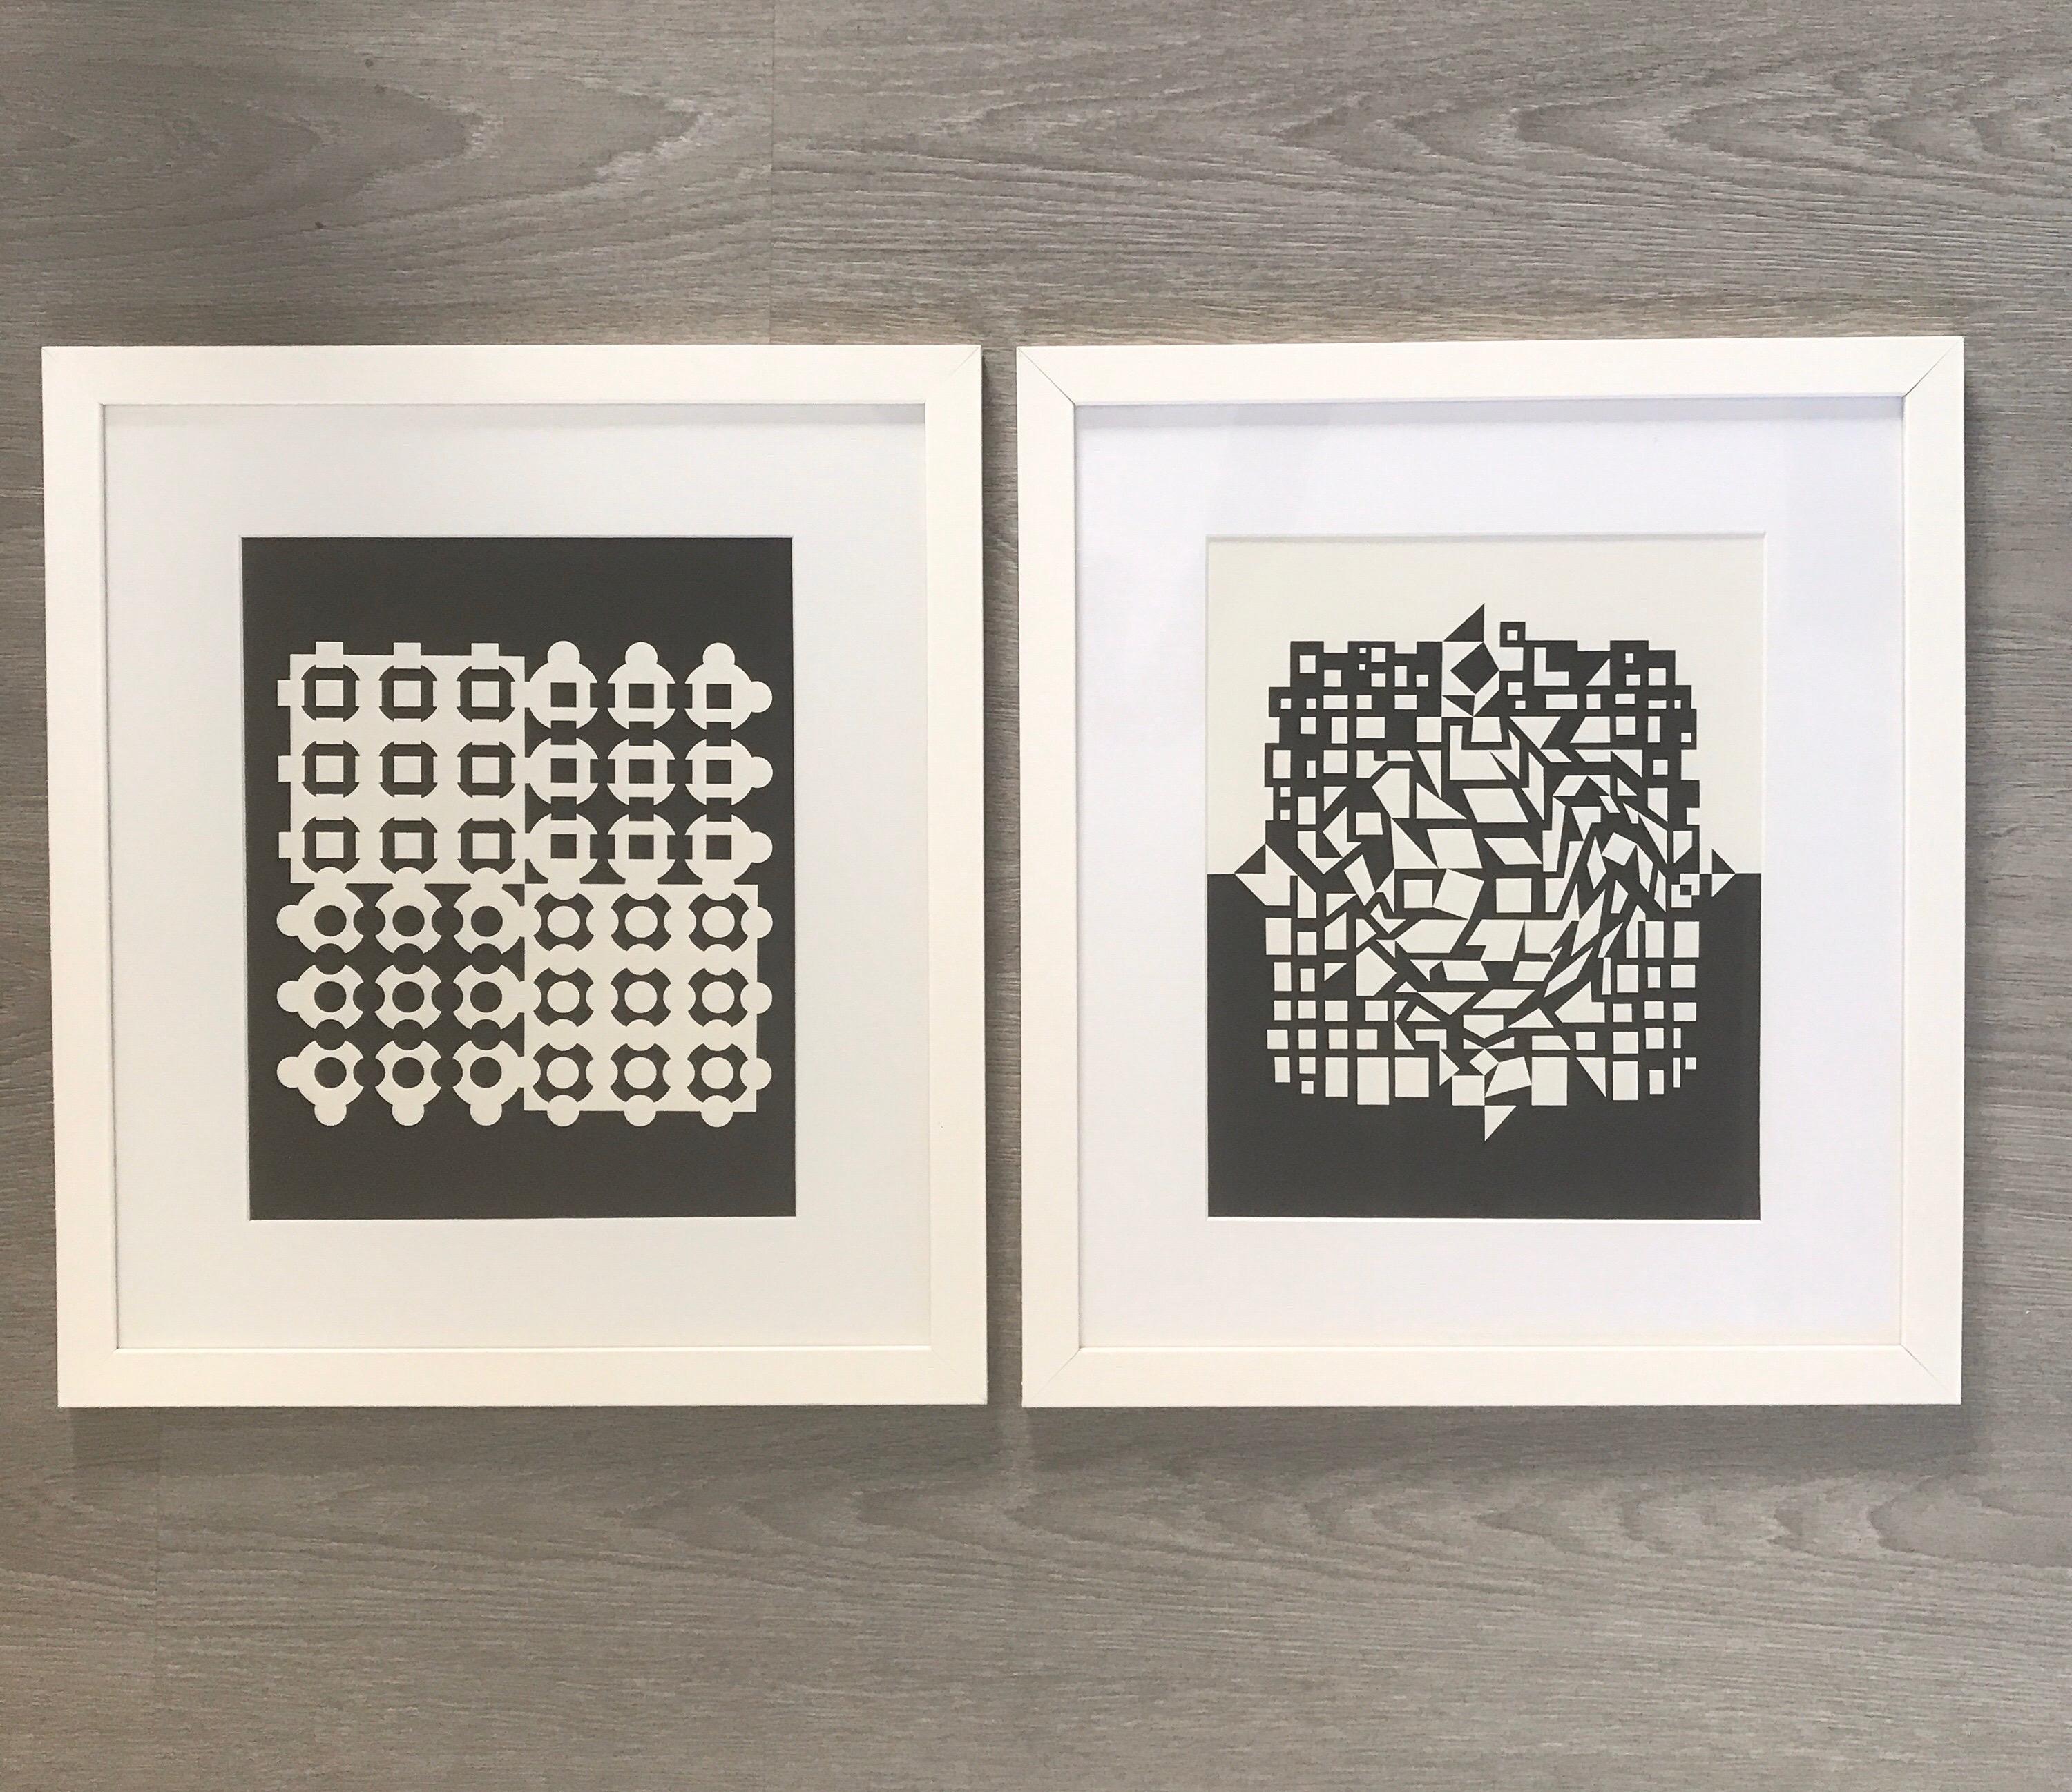 Black and White two heliogravure prints on paper from the Editions de Griffon 1971 by Victor Vasarely.
Print is 32cm x 28cm.